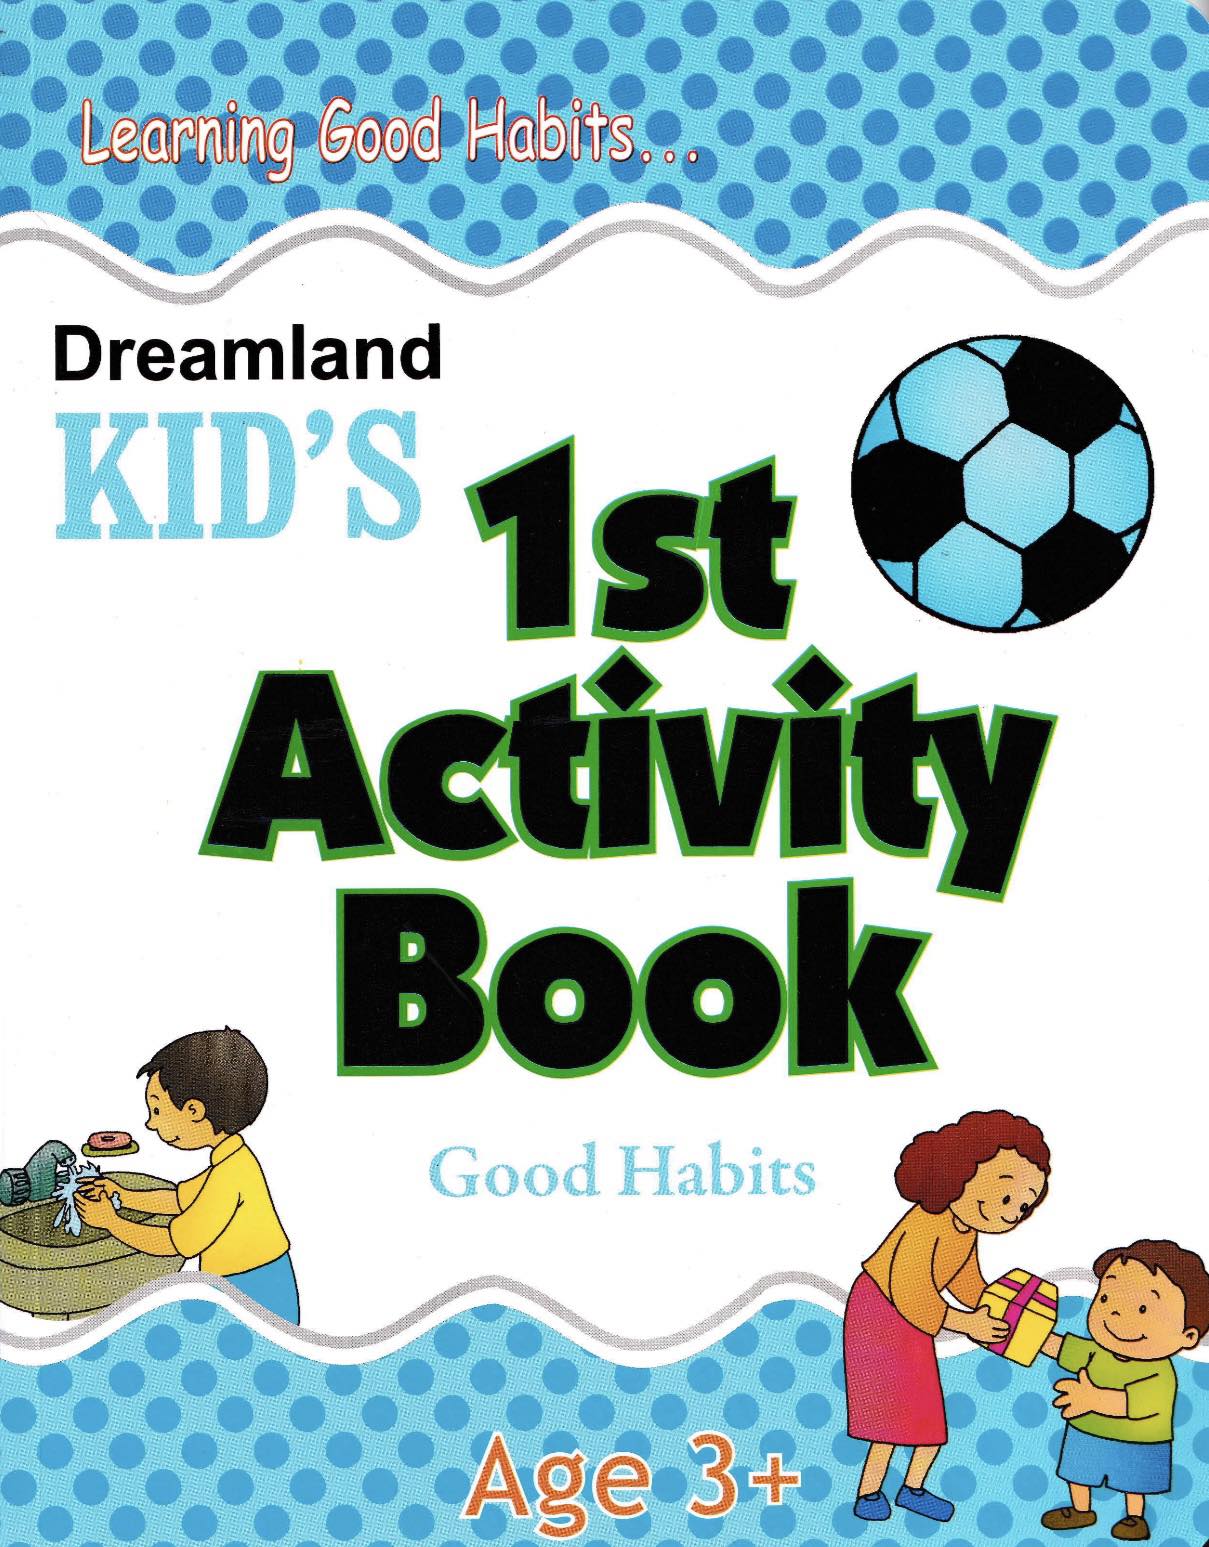 Dreamland Kid's 1st Activity Book for Age 3+